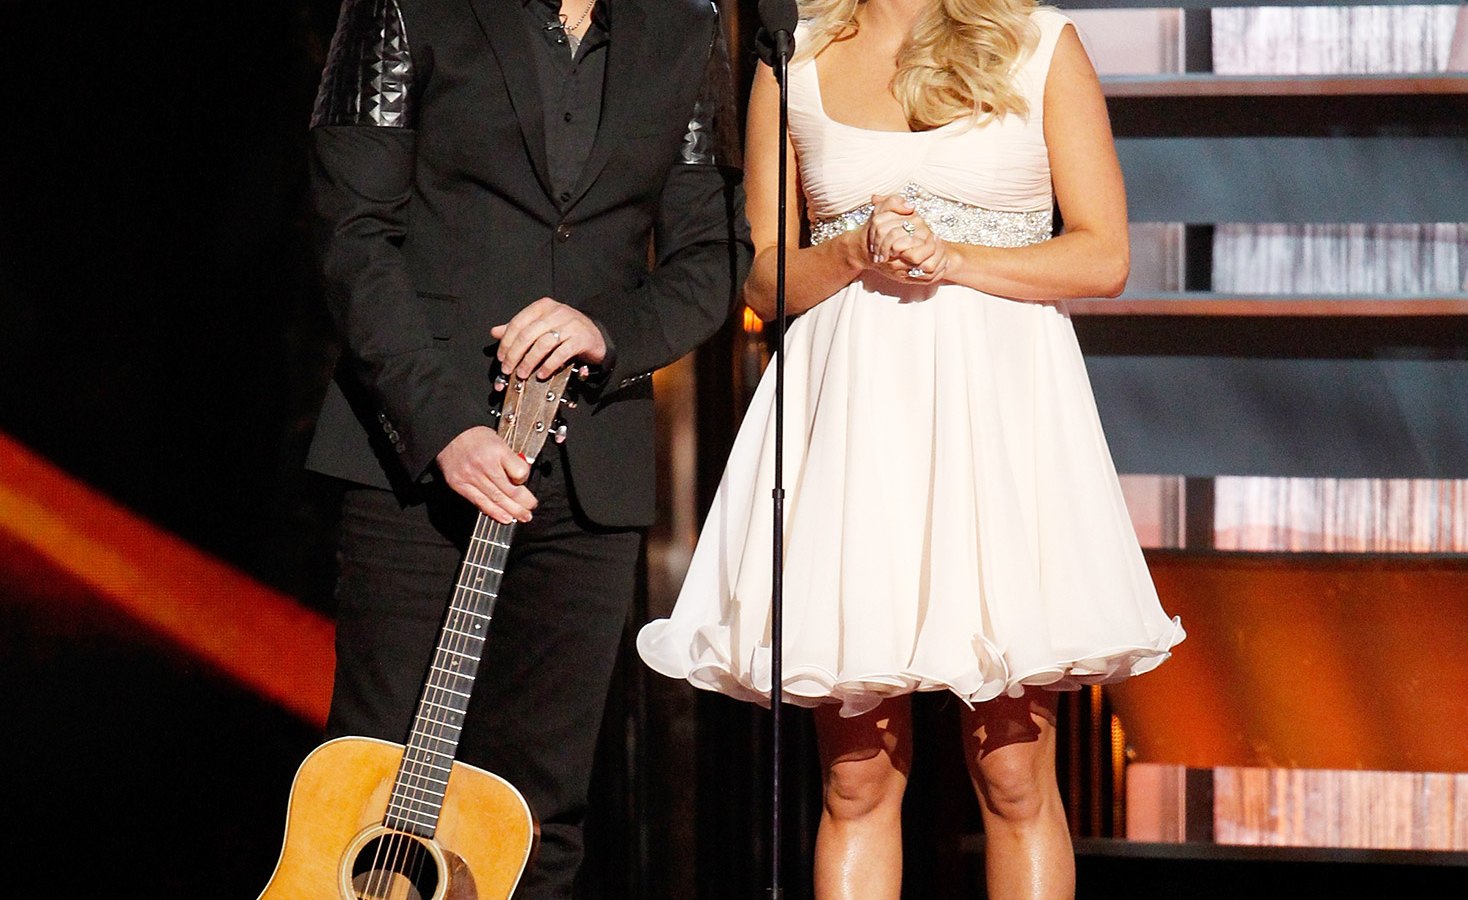 Brad Paisley and Carrie Underwood